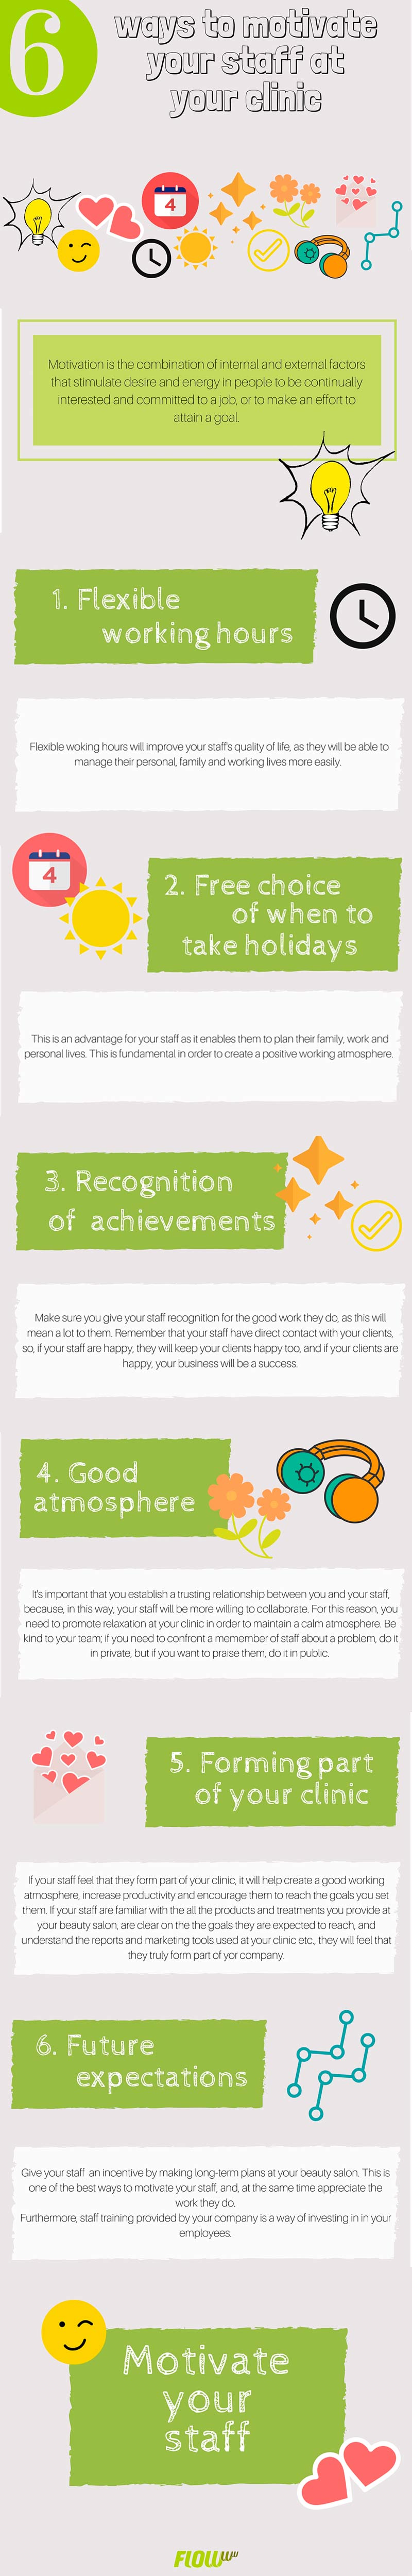 motivate_your_staff_at_your_clinic_infographic